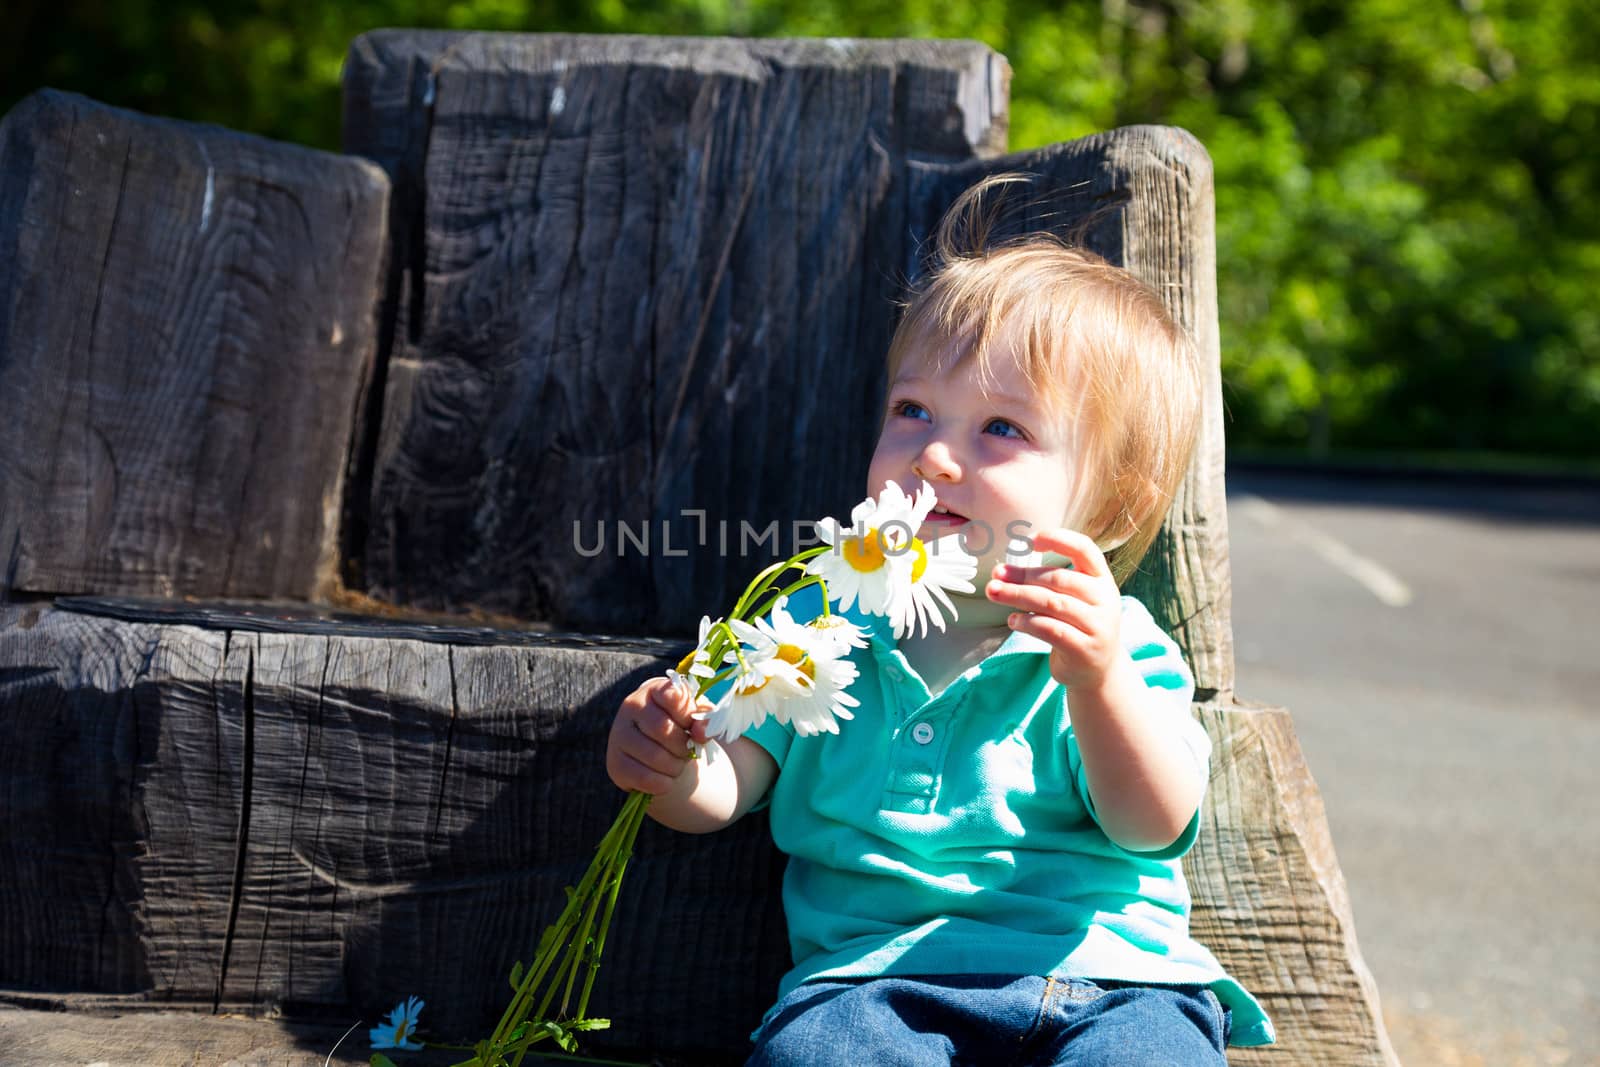 A young boy plays with some flowers while sitting on a hand carved seat made from an old stump.